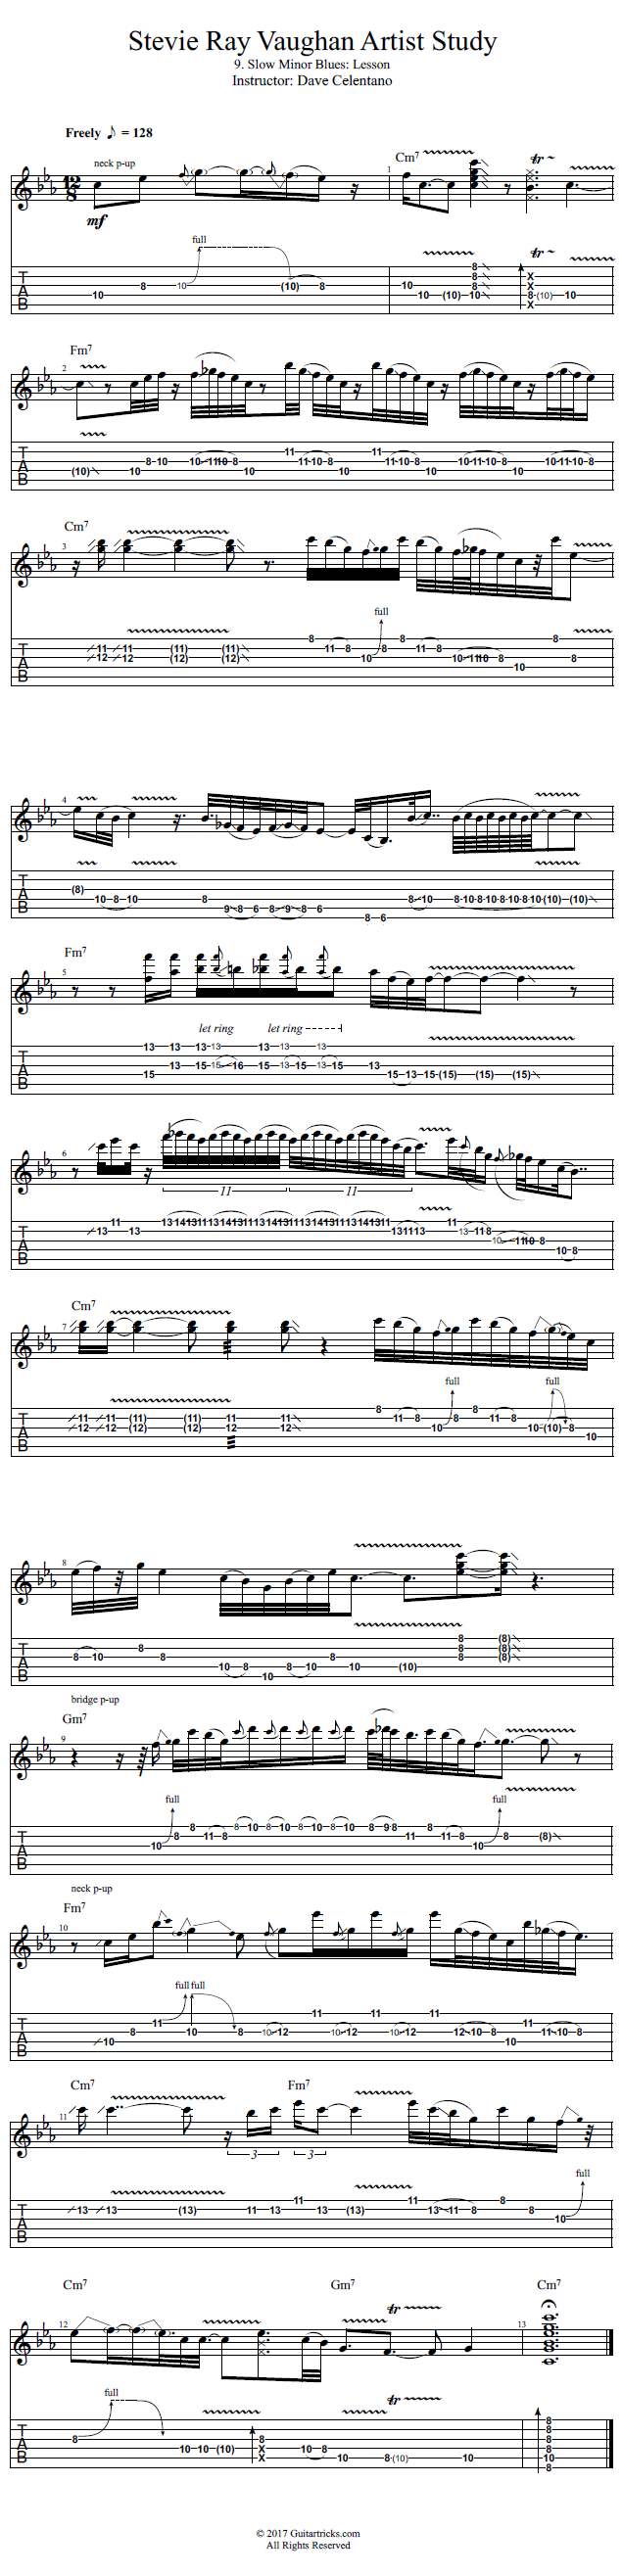 Slow Minor Blues: Lesson song notation